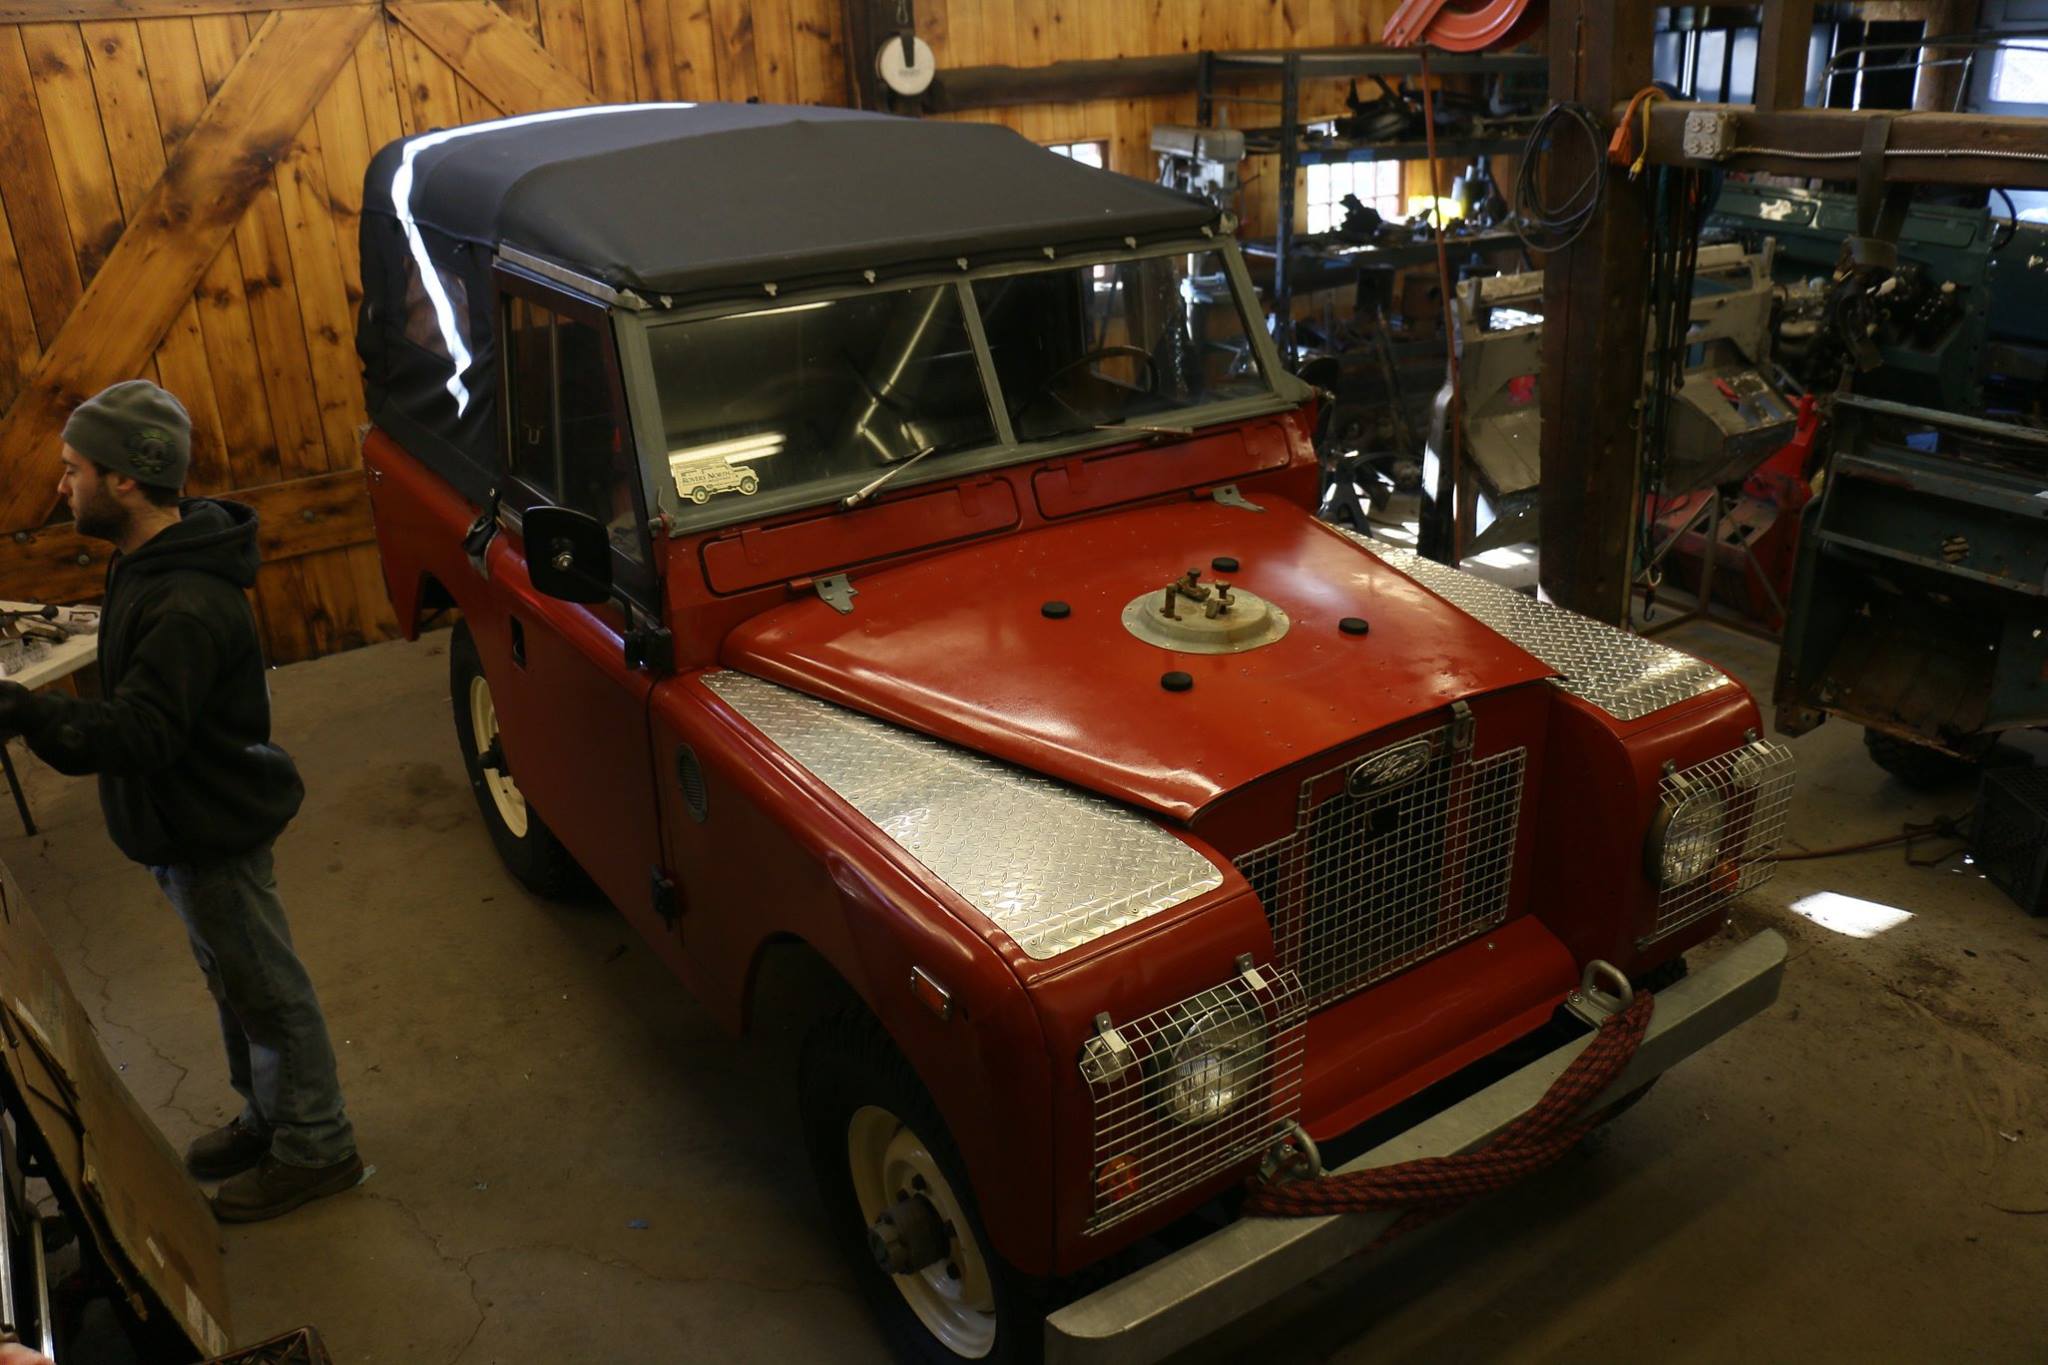 This 1969 Series IIa is ready for a basic restoration. The frame will be replaced, the drivetrain, brake system, electrical system and fuel system will be rebuilt. The bulkhead will be restored and painted in the correct Poppy Red Glasurit. It will be just like our full restorations minus a full strip and repaint and other cosmetic improvements.